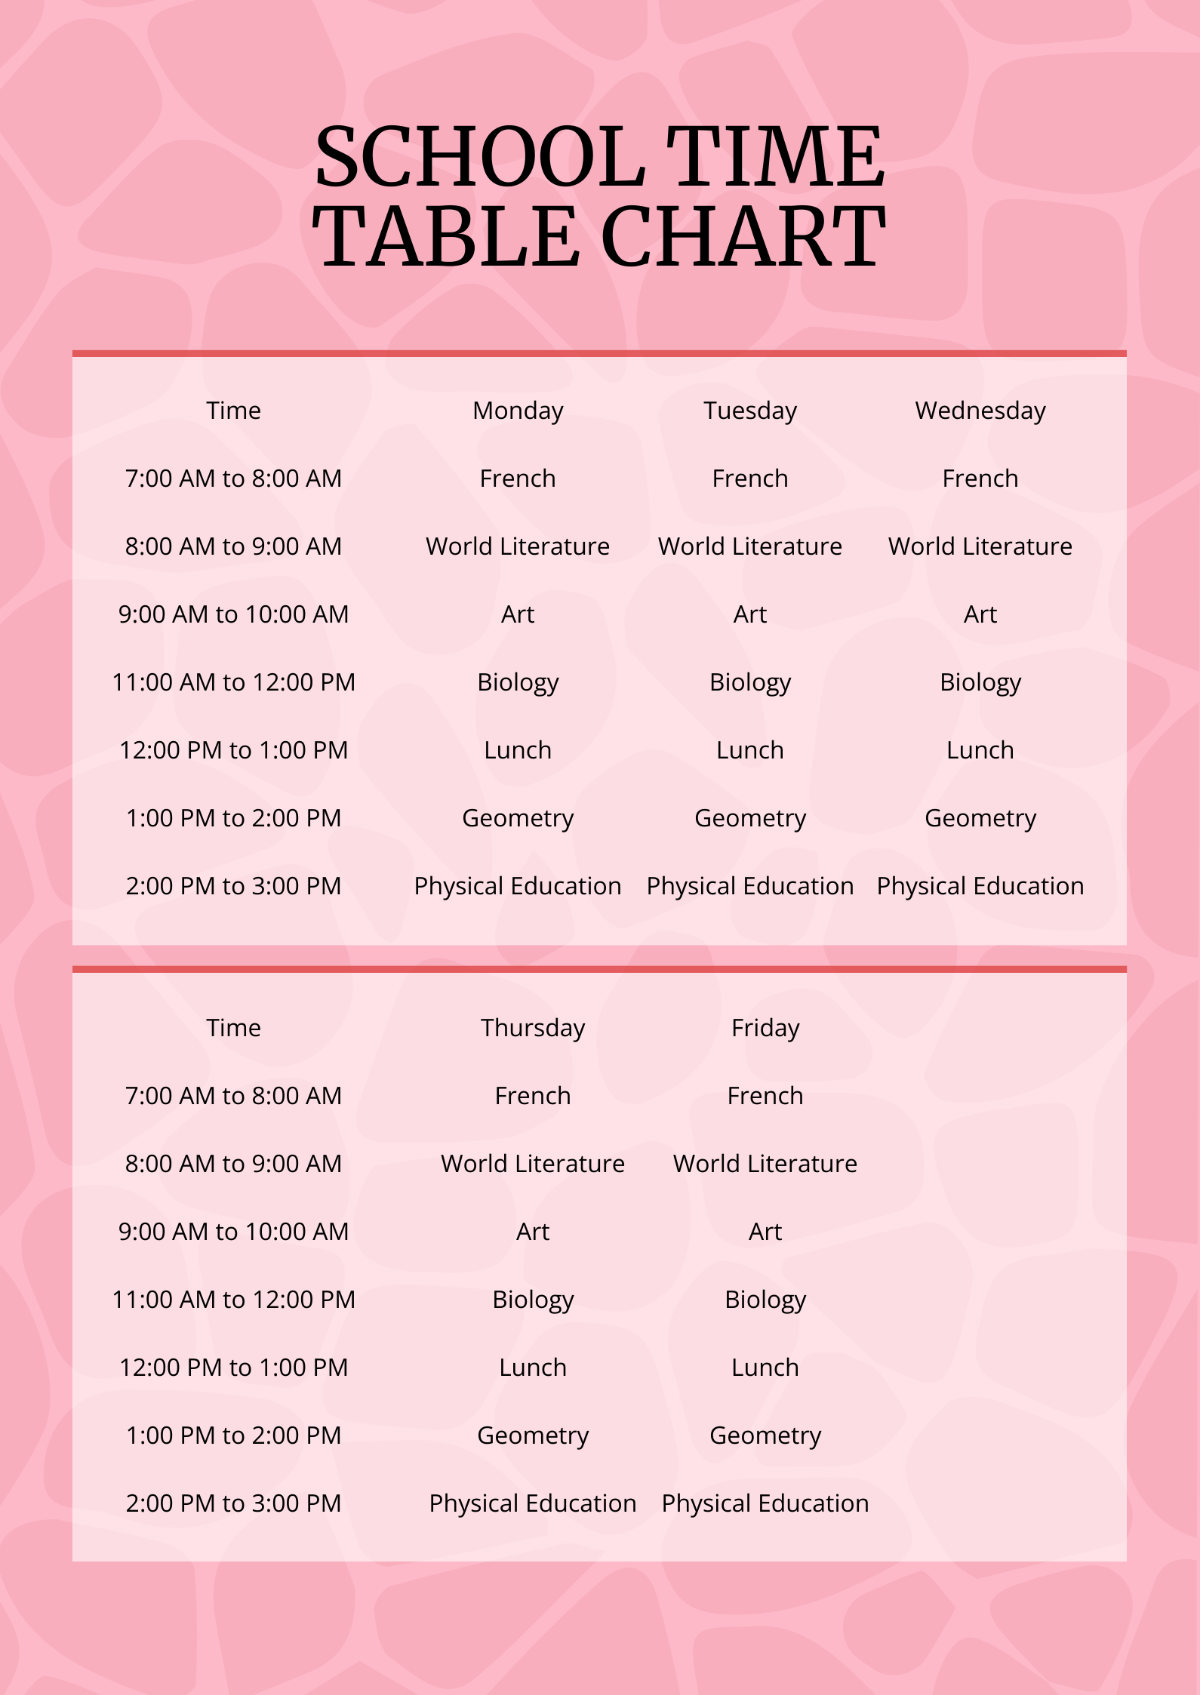 Free School Time Table Chart